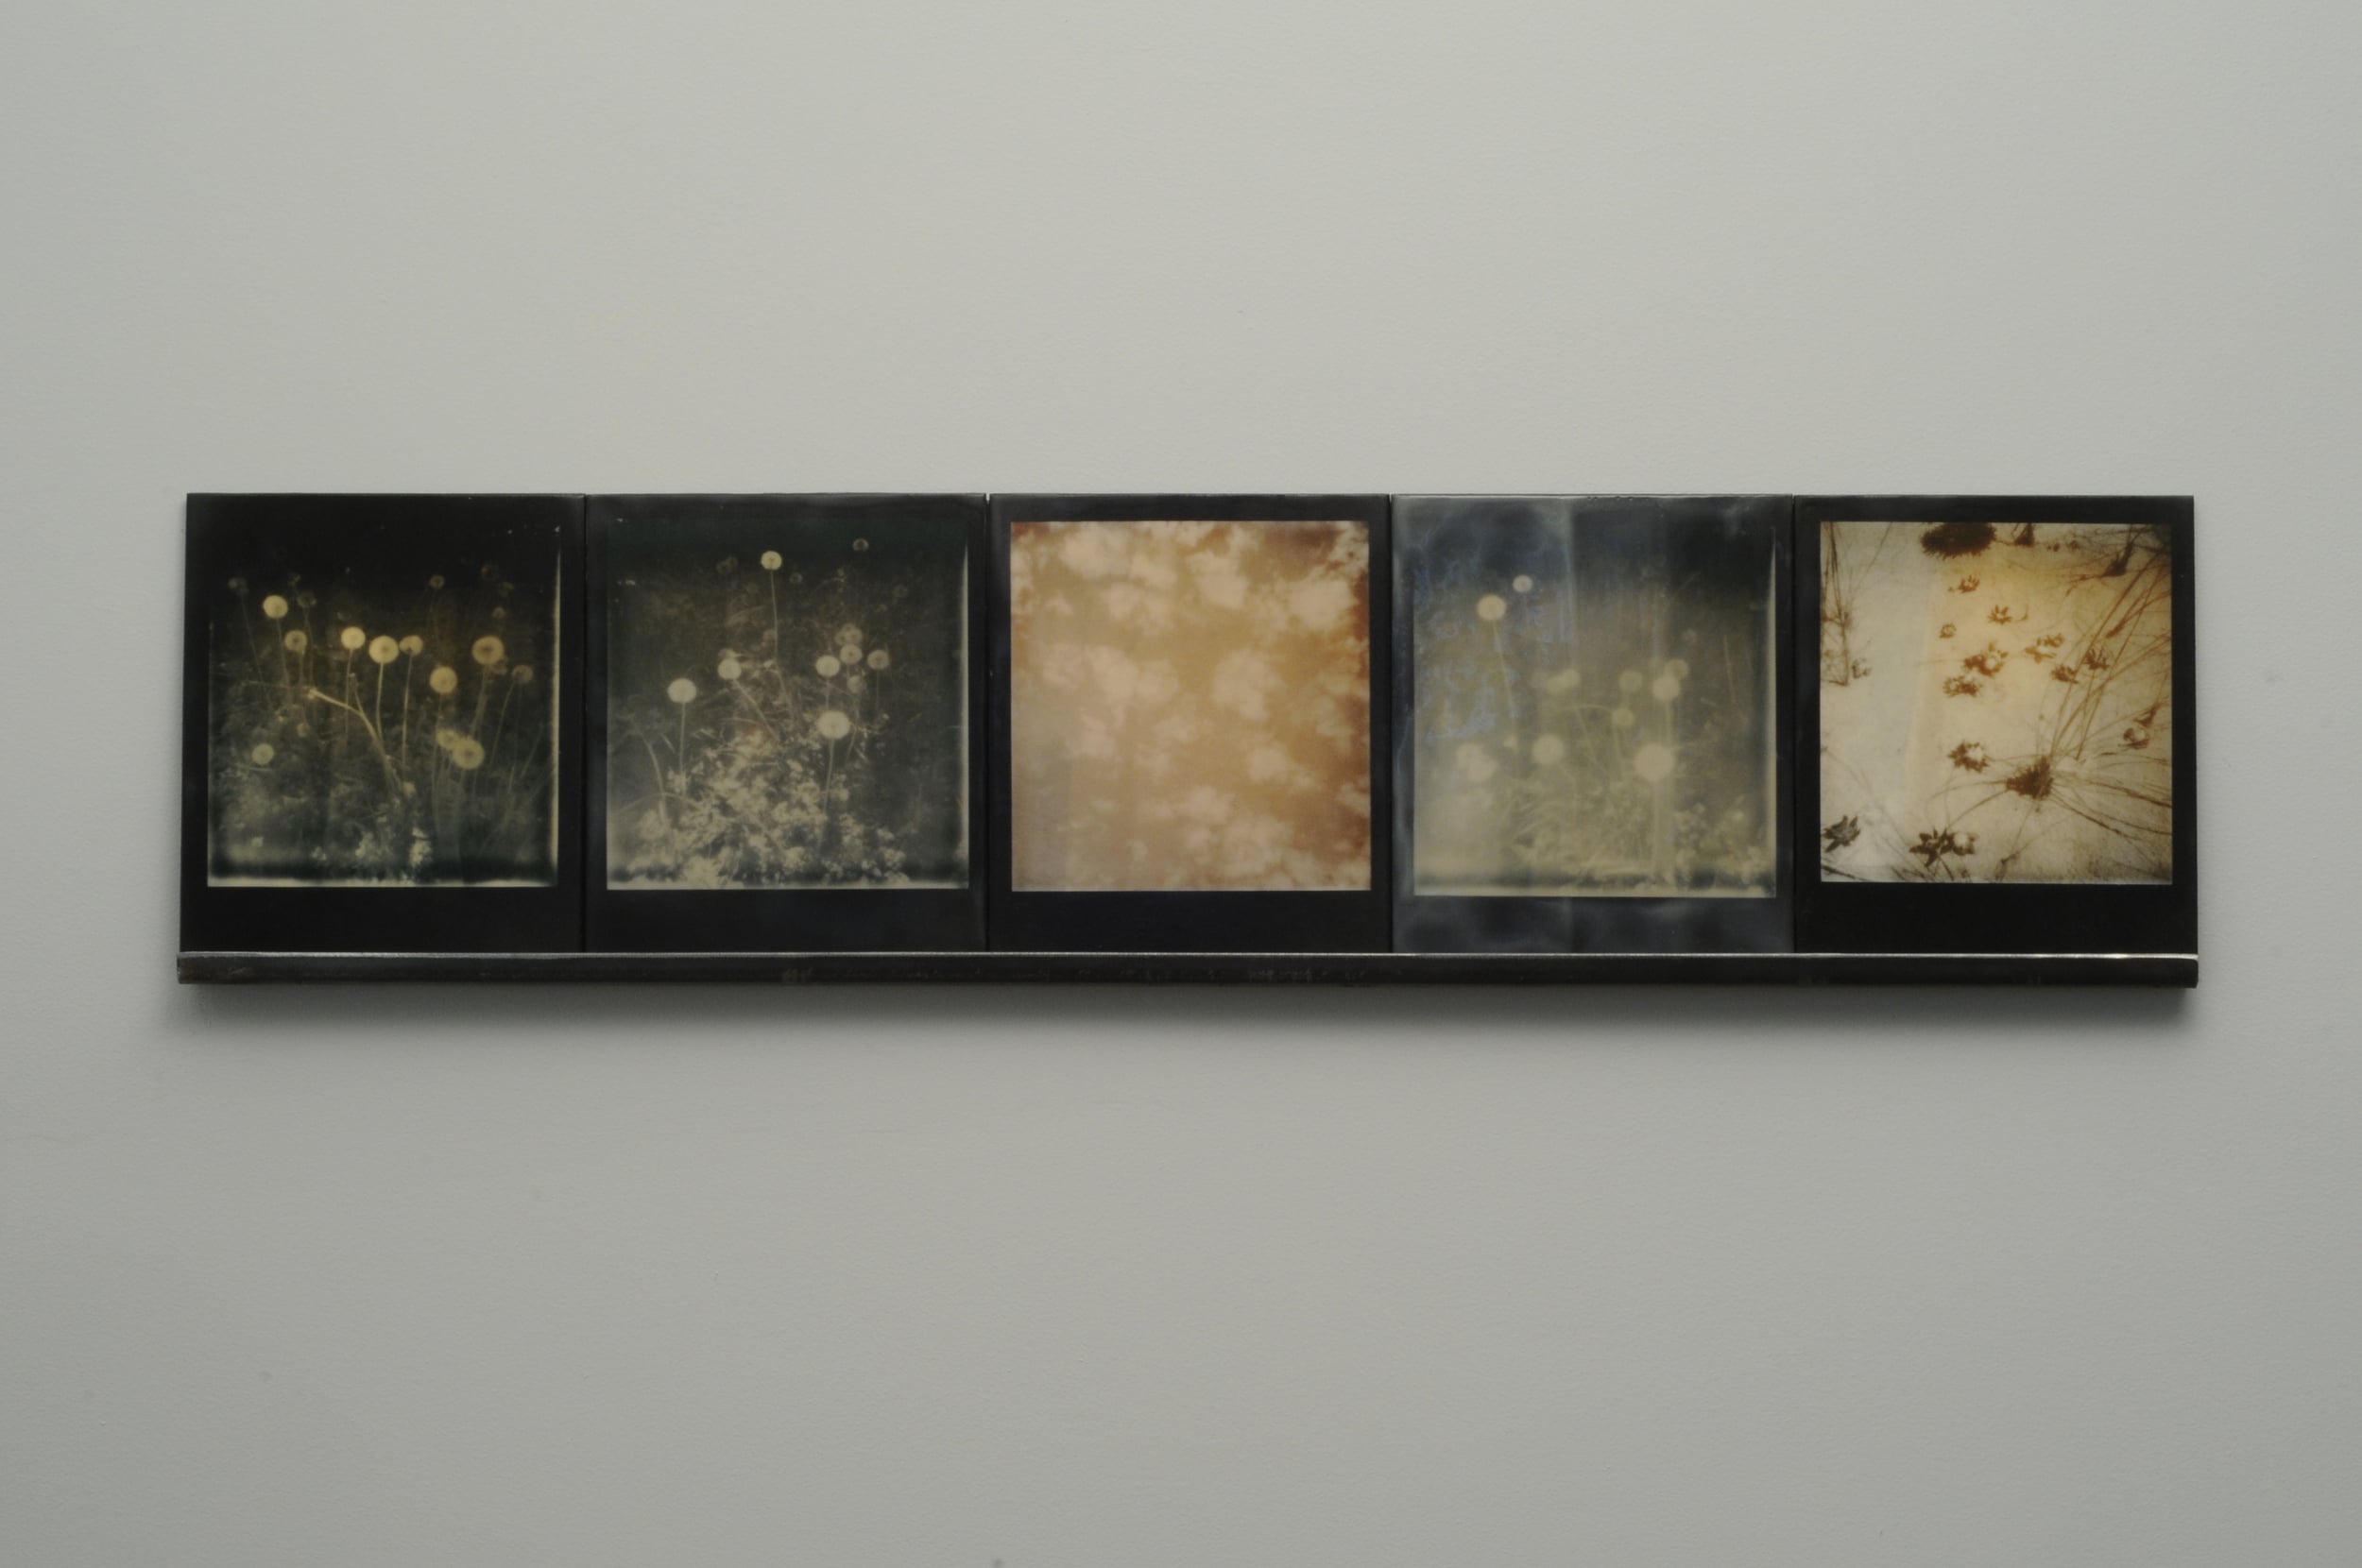    Starfall 1  , 2014-15, pigment prints on cotton and panel with encaustic medium and steel shelf, 8.5" x 35.25"&nbsp; &nbsp; variable edition of 2 and 1 artist proof 